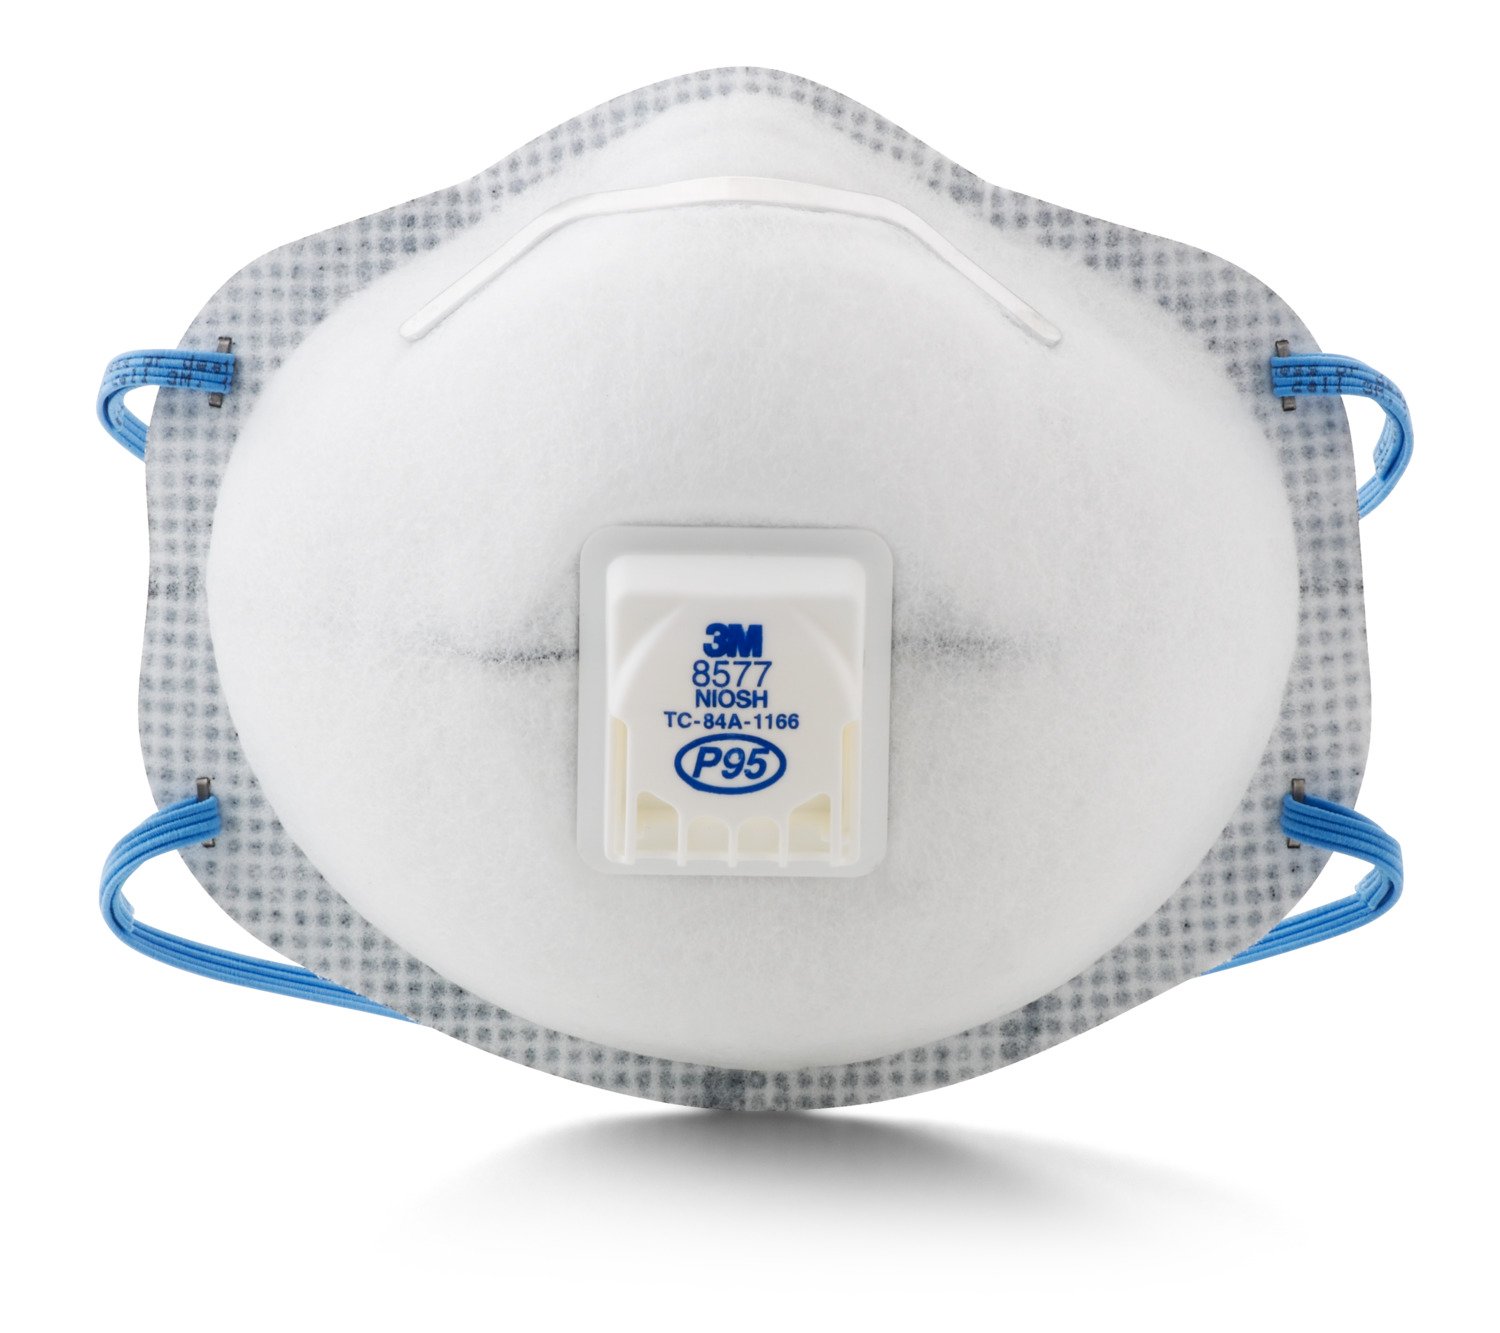 3M Particulate Respirator 8577, P95, with Nuisance Level Organic Vapor Relief (Pack of 10)